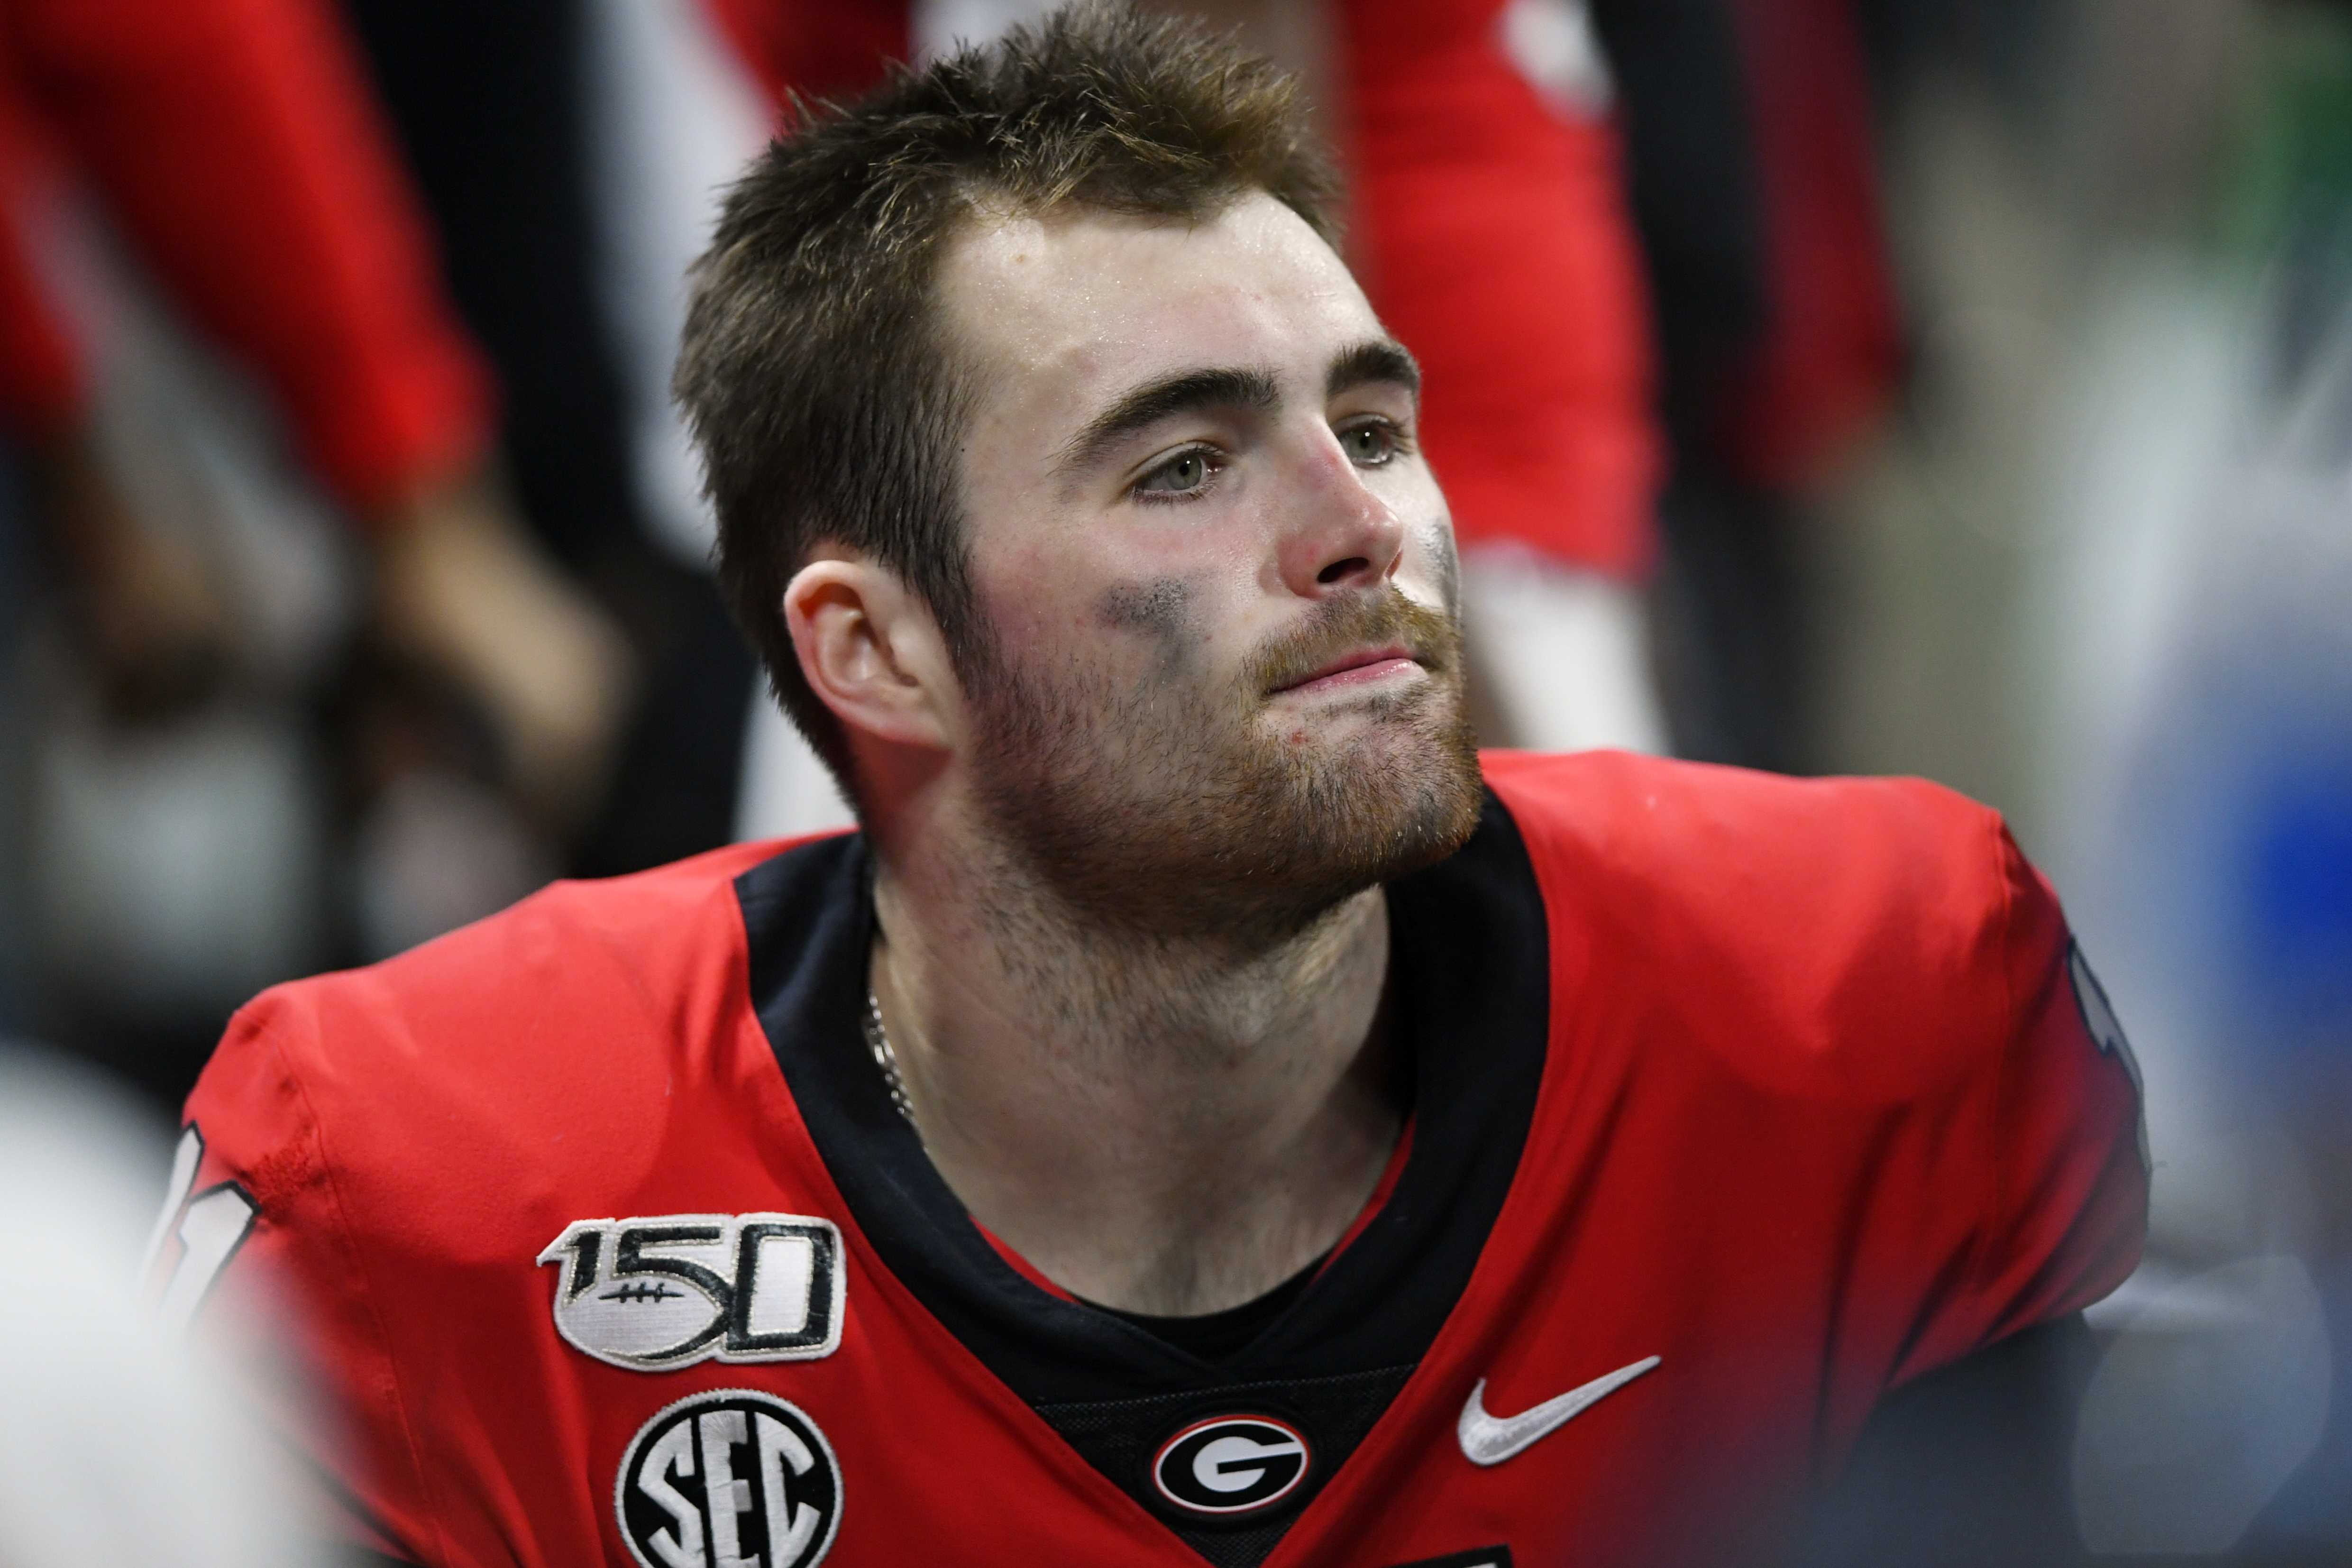 Georgia QB Jake Fromm has day to forget in blowout loss